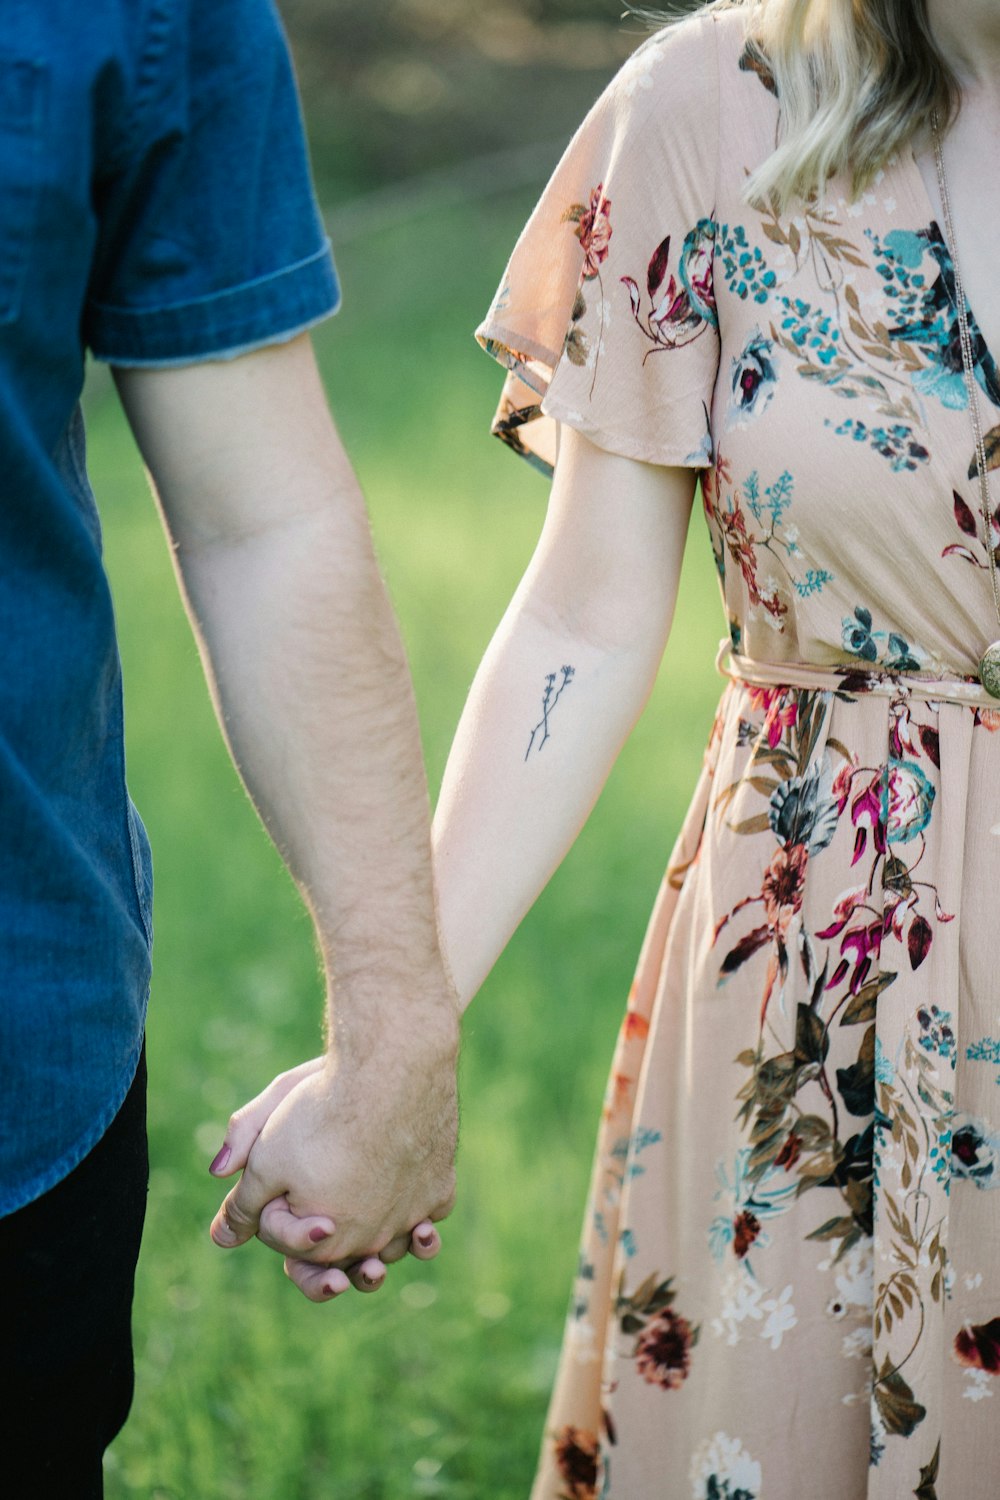 selective focus photography of man and woman holding there hands